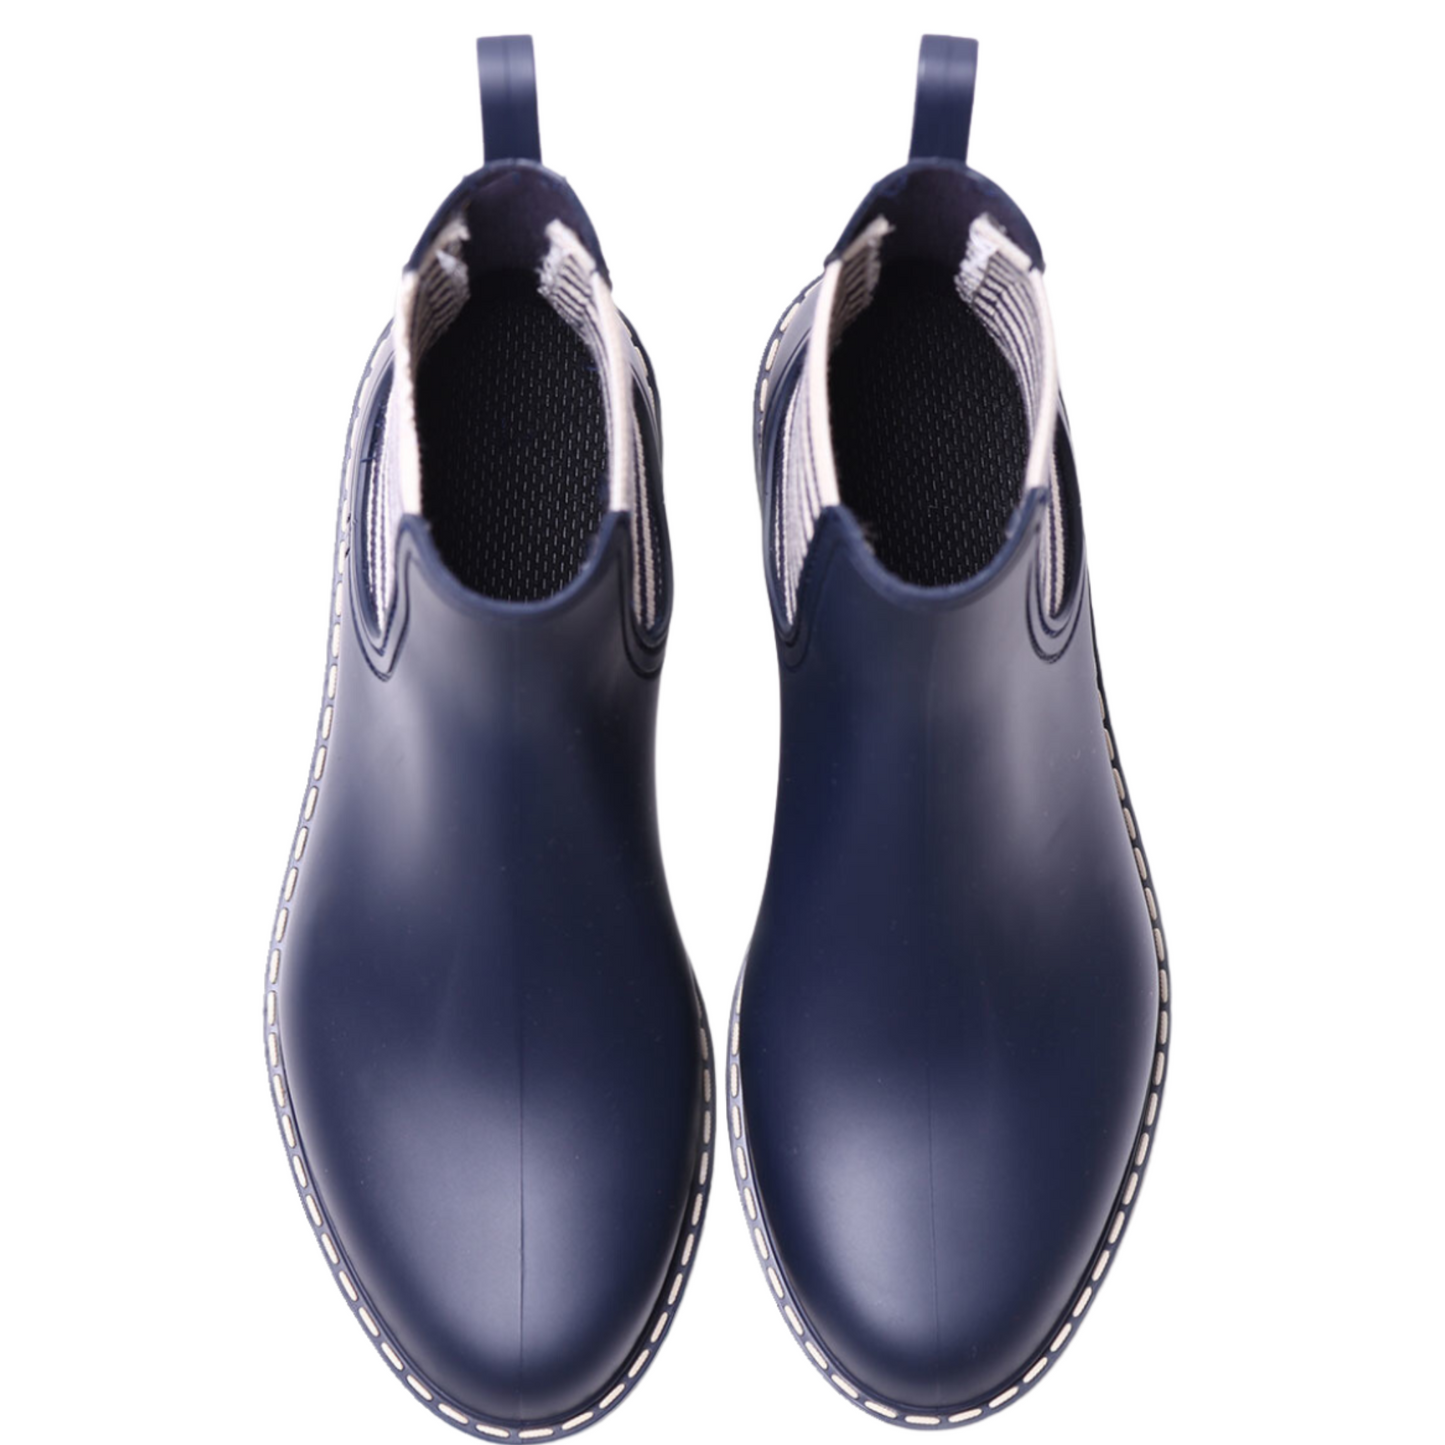 Top view of pair of short navy rain boots with elastic side gores and pull on tabs